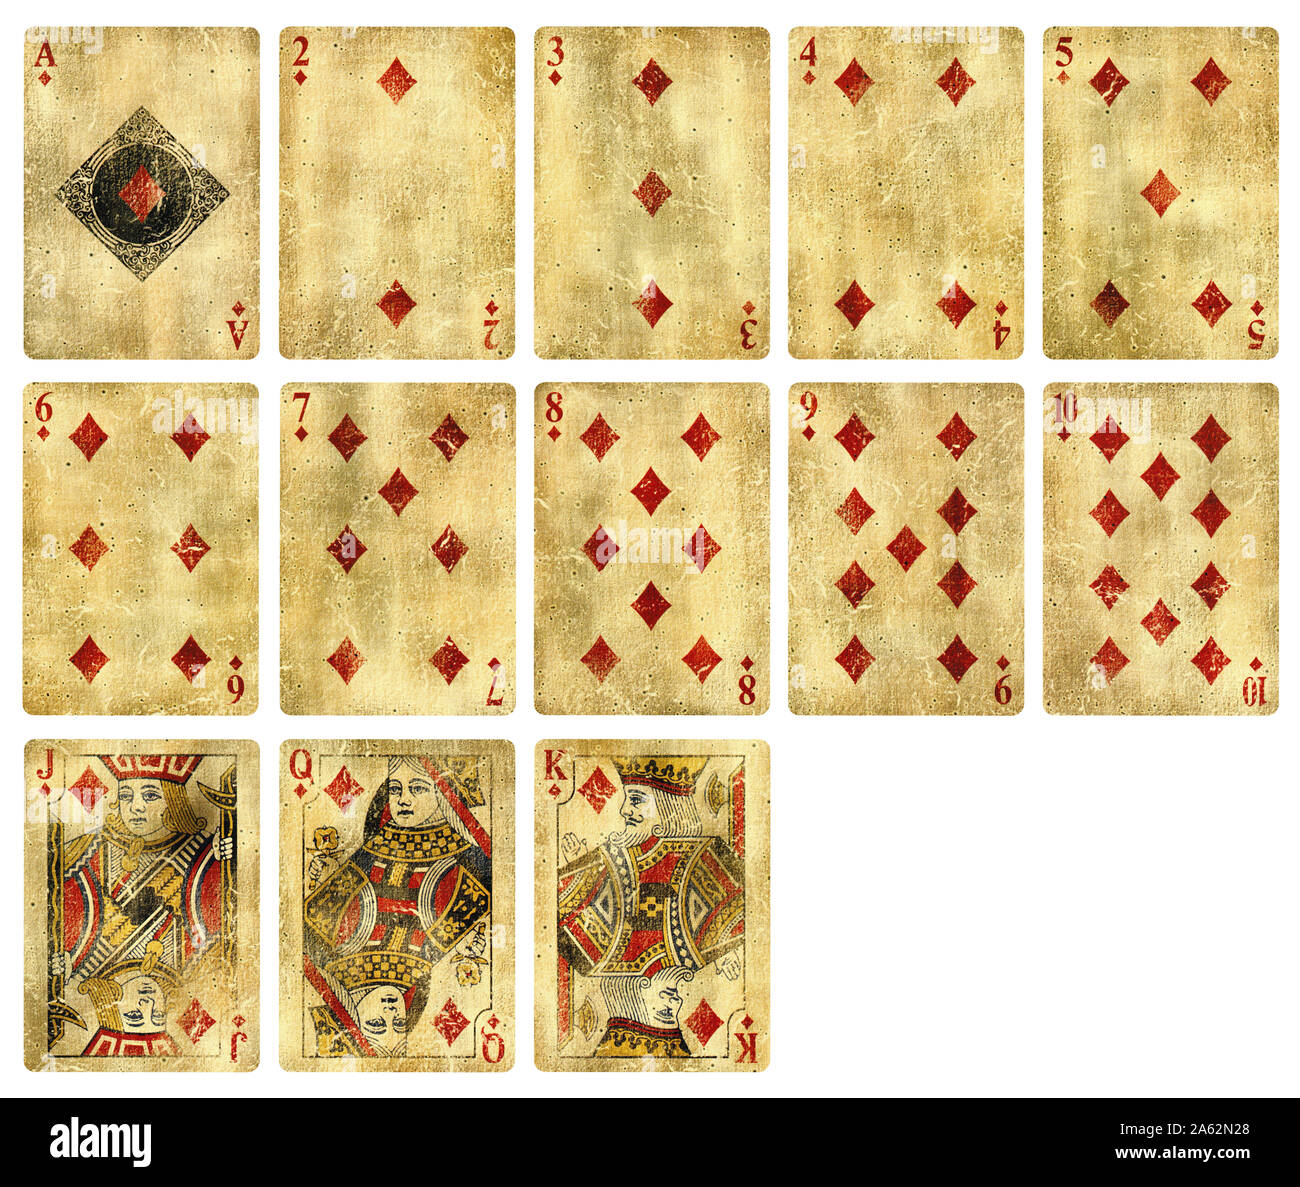 Vintage Playing cards of Diamond suit, isolated on white background - High quality. Stock Photo